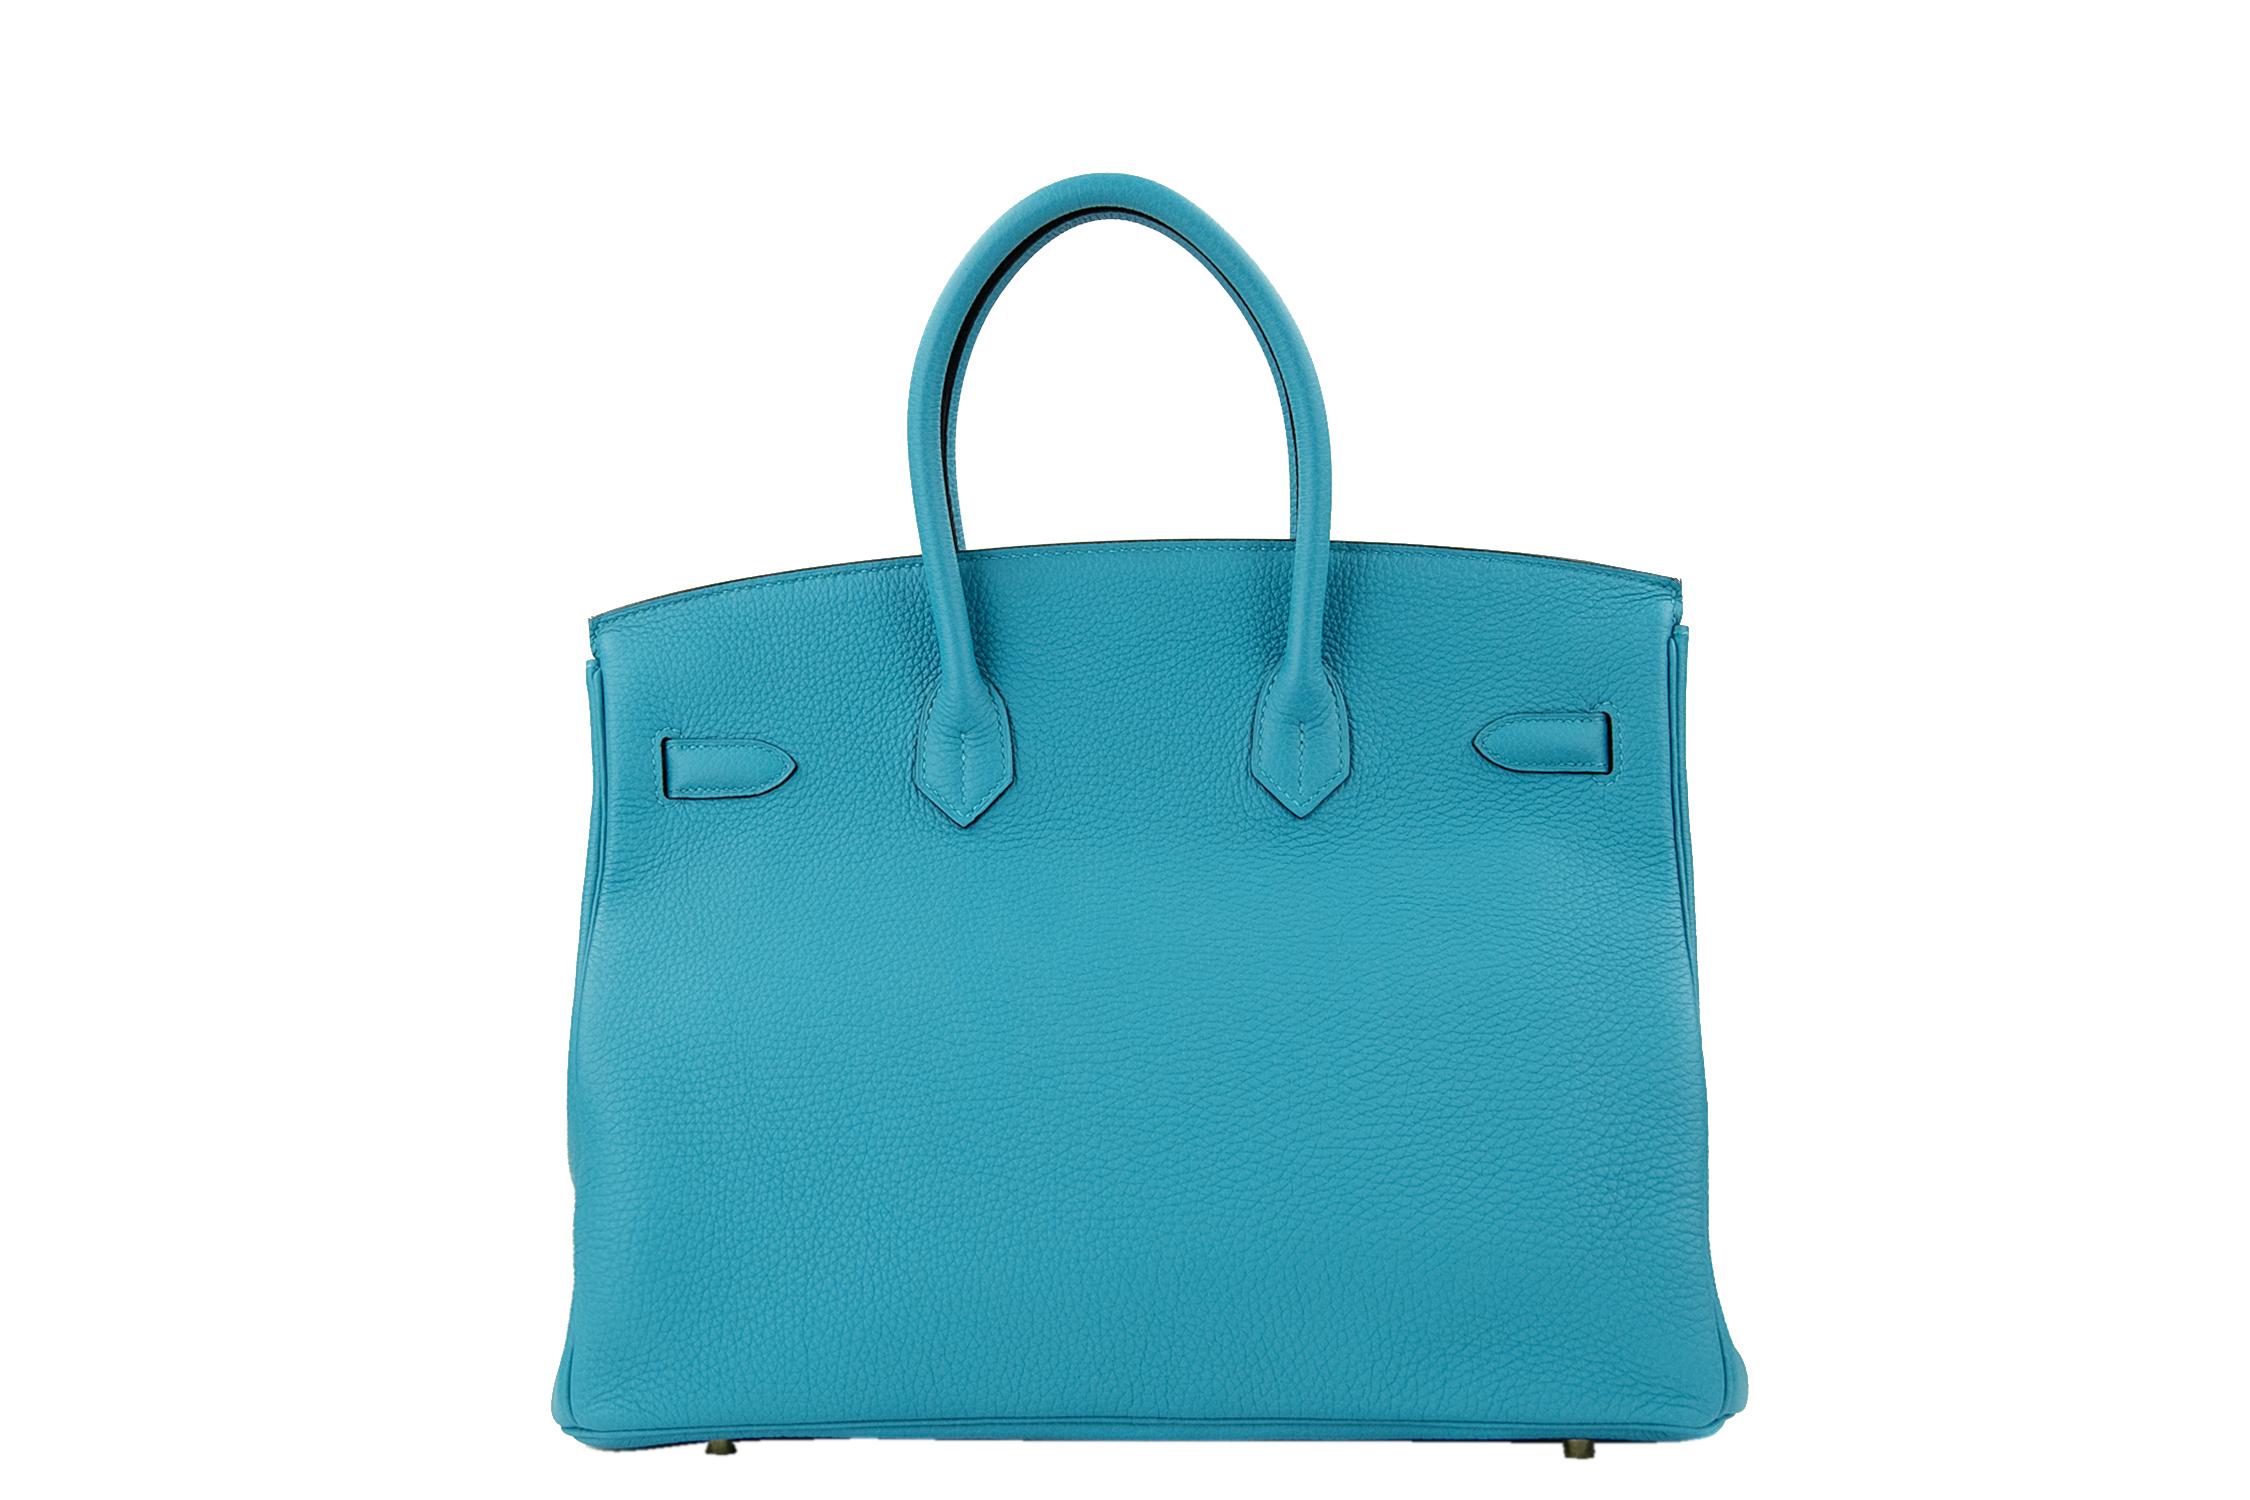 Hermes Birkin 35cm bag in Bright Blue Clemence Togo. This iconic special order Hermes Birkin bag is timeless and chic. Fresh and crisp with gold hardware.

    Condition: New or Never Used
    Made in France
    Bag Measures: 35cm (13.8